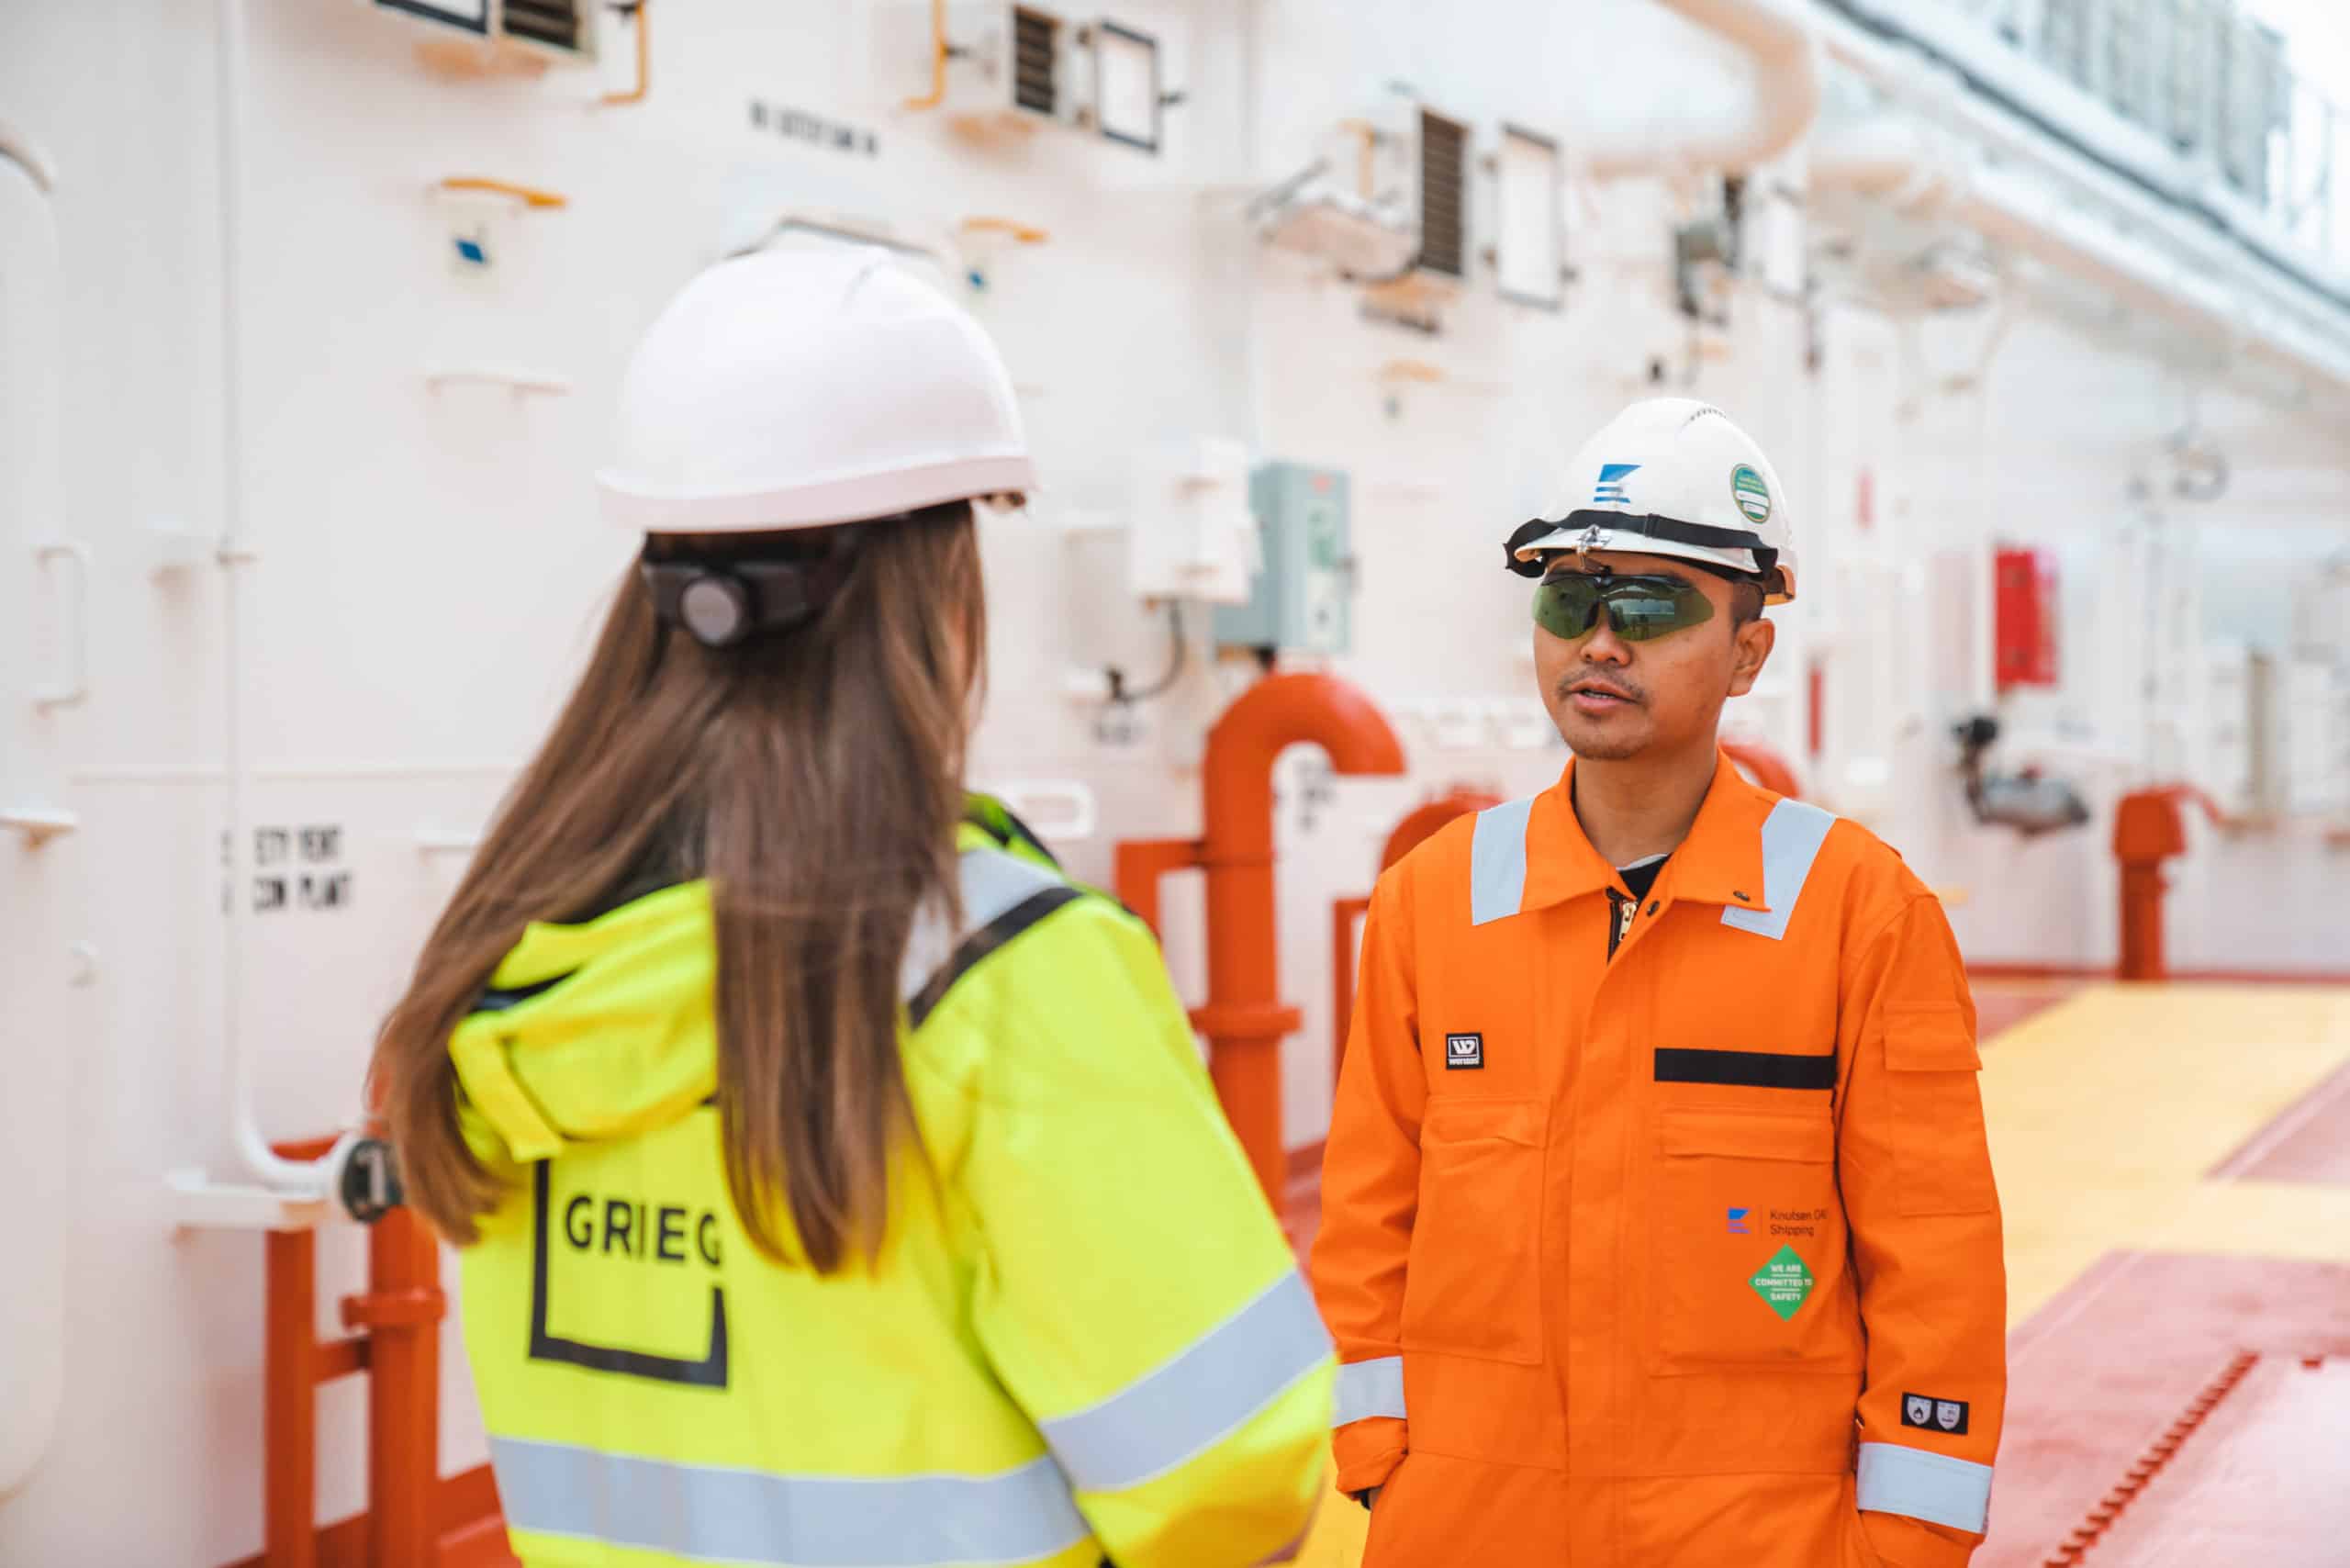 Grieg colleagues in organge and yellow uniform having a chat on the deck of a ship.